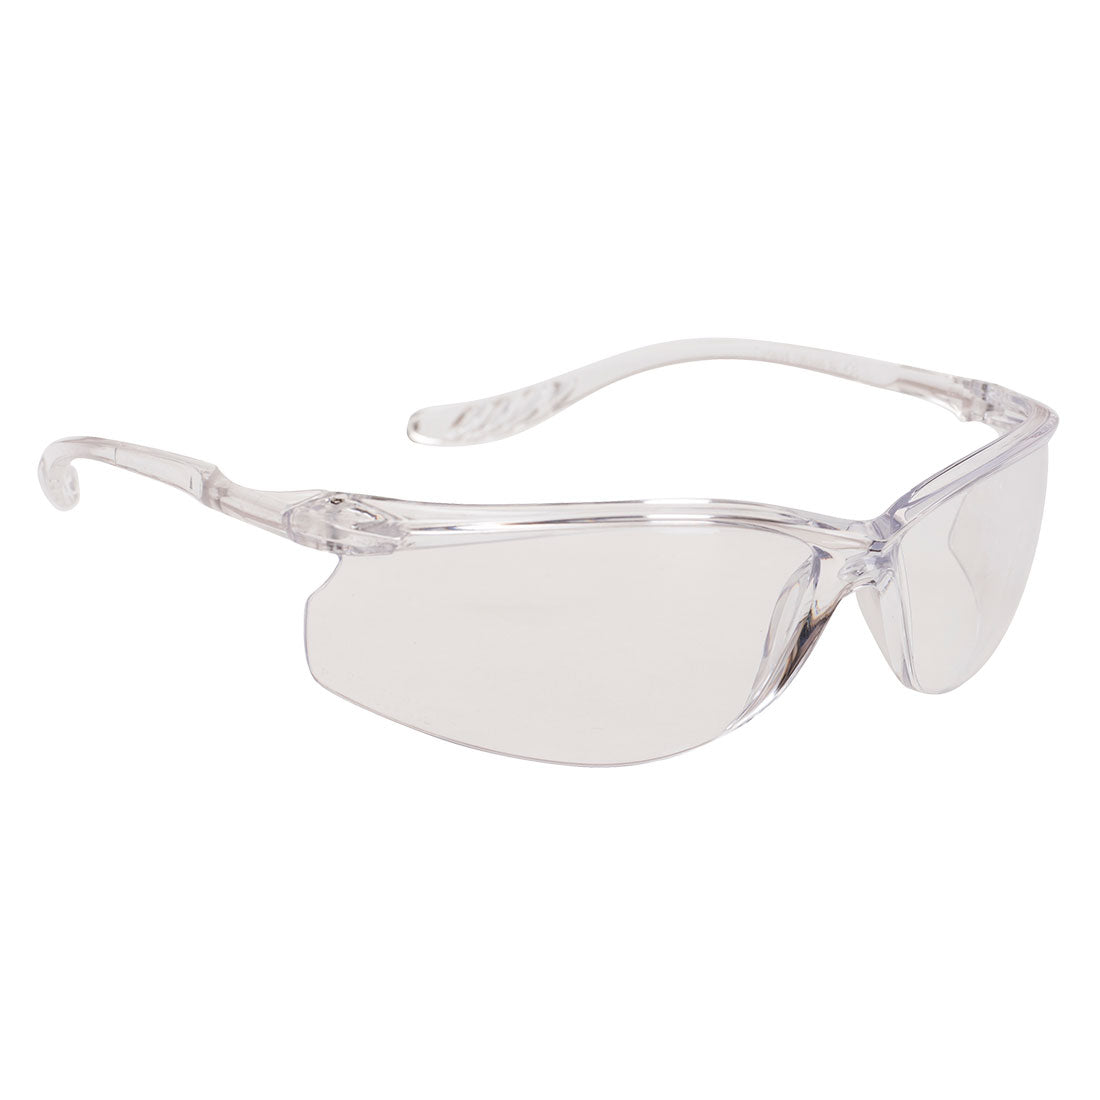 PS14 - Lite Plus Safety Glasses (Pack of 5)